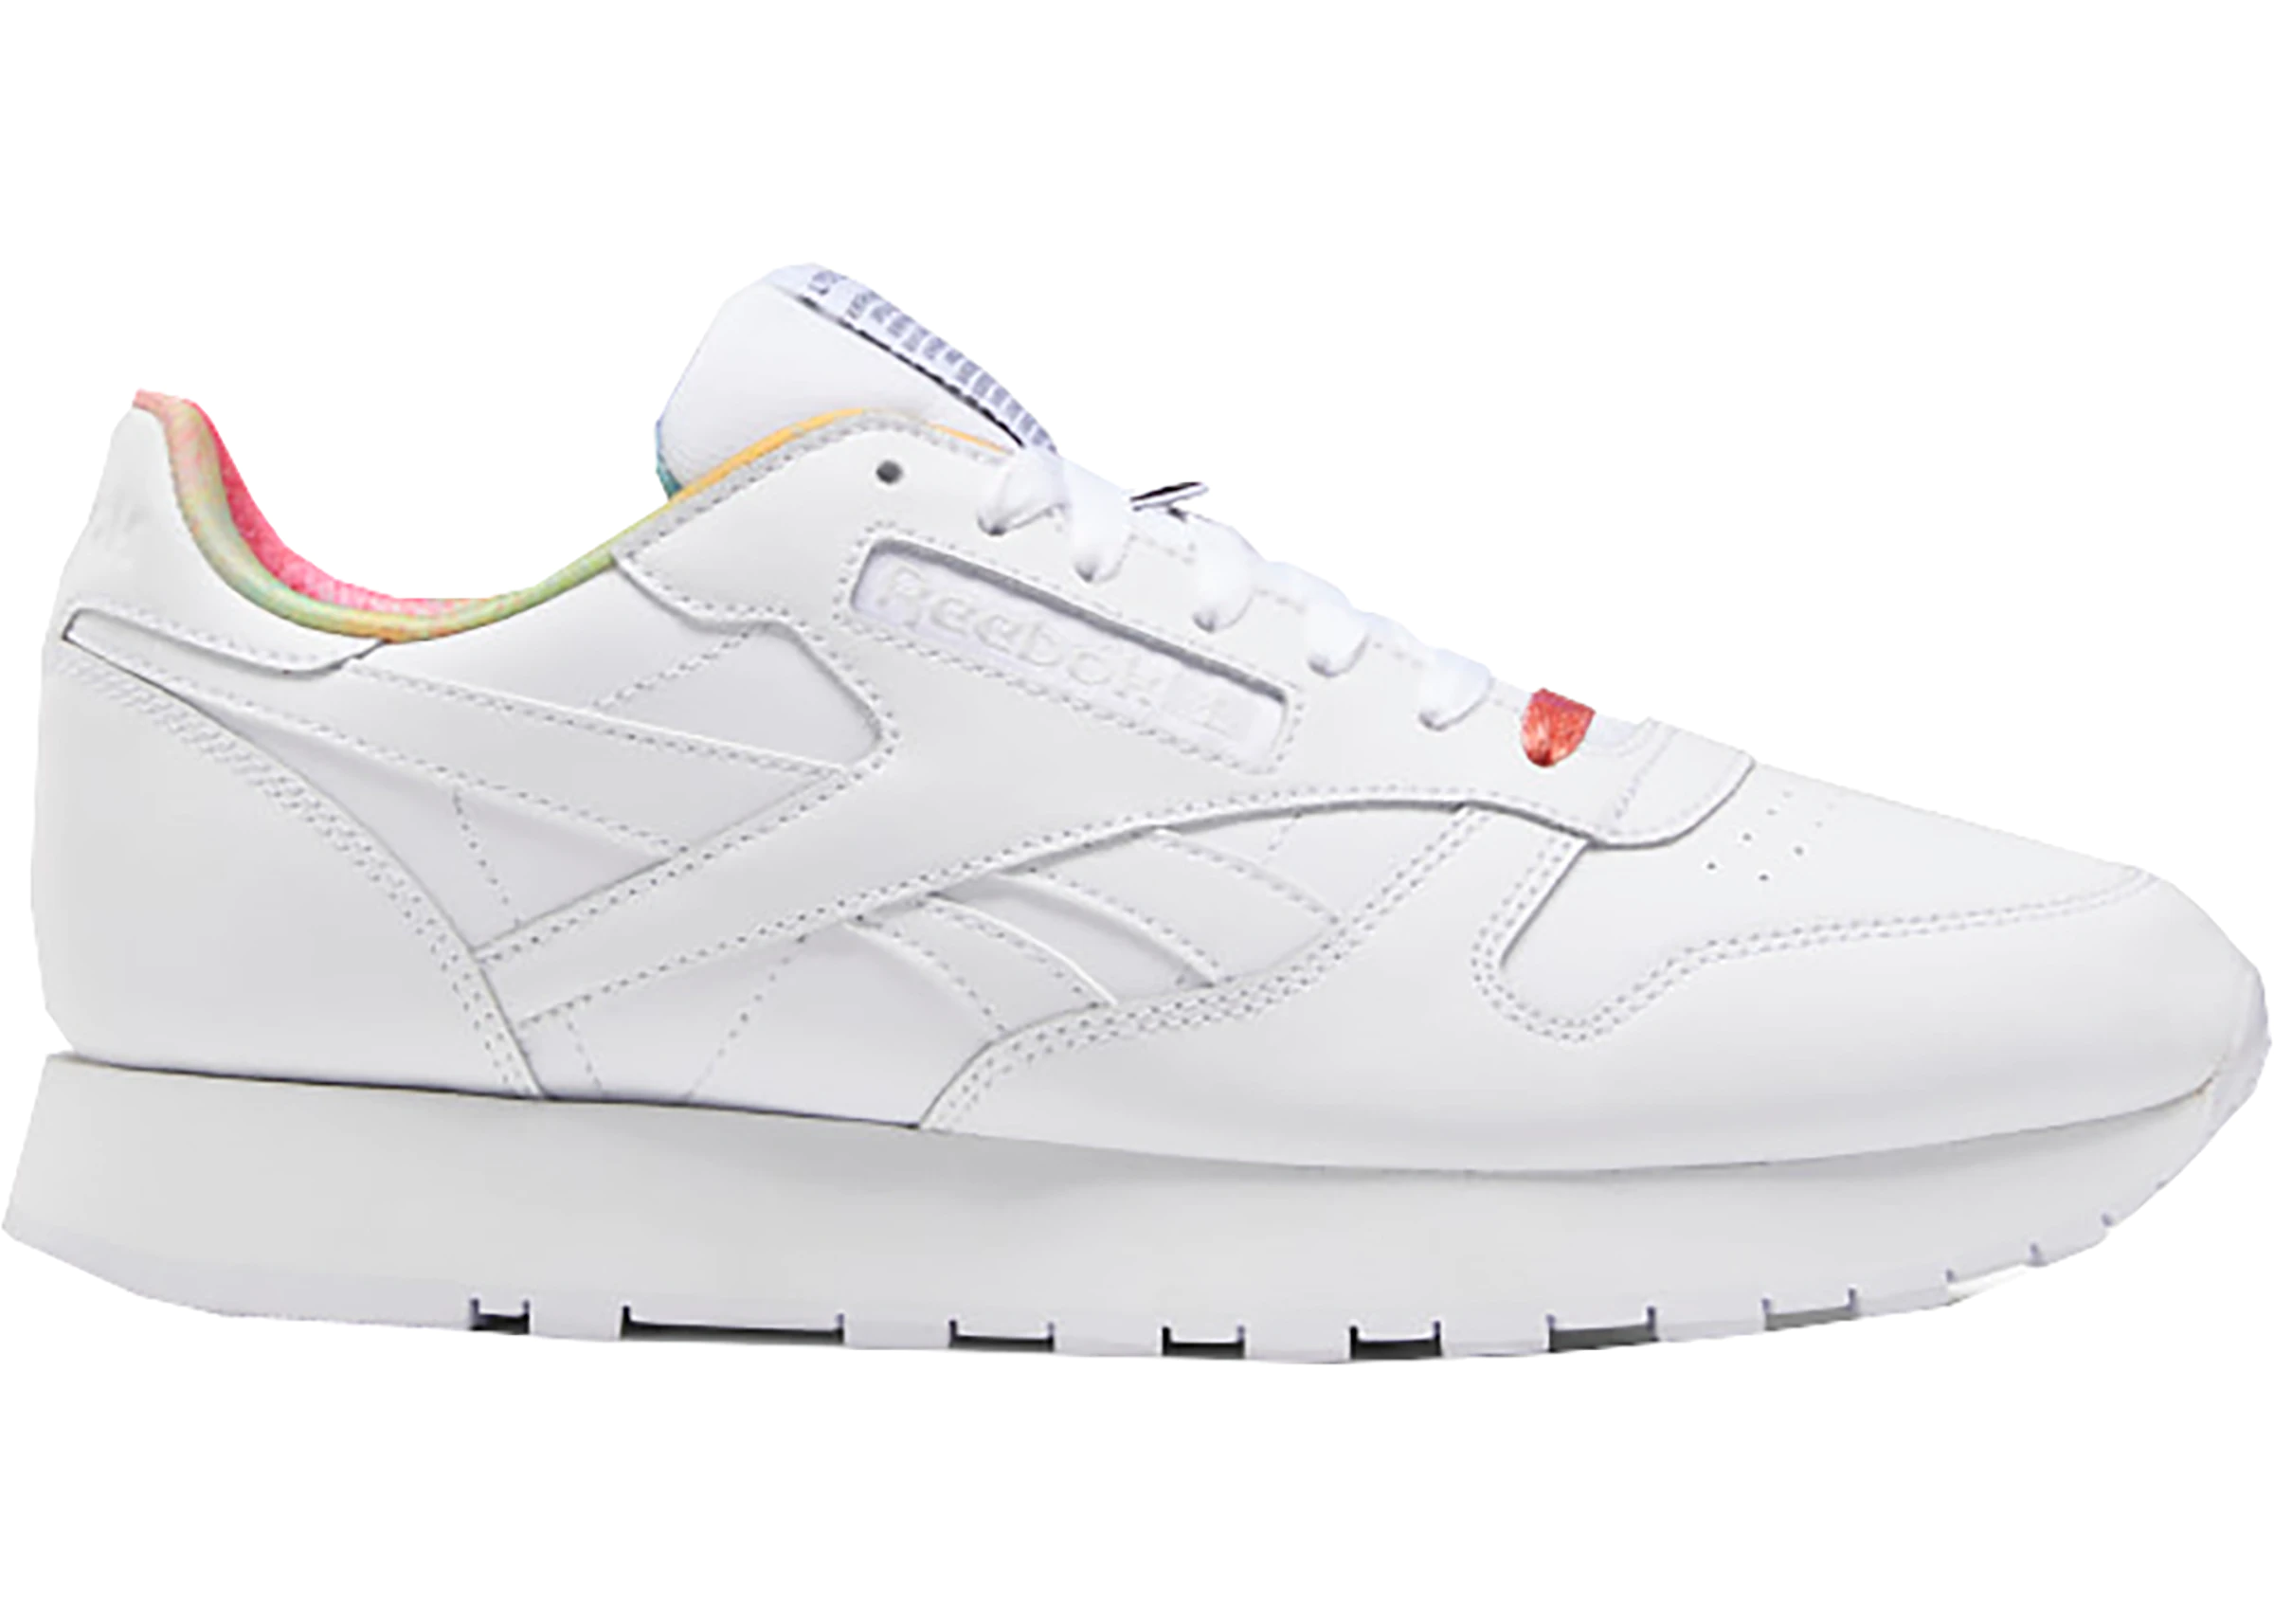 Buy Reebok Classic Leather Shoes - StockX